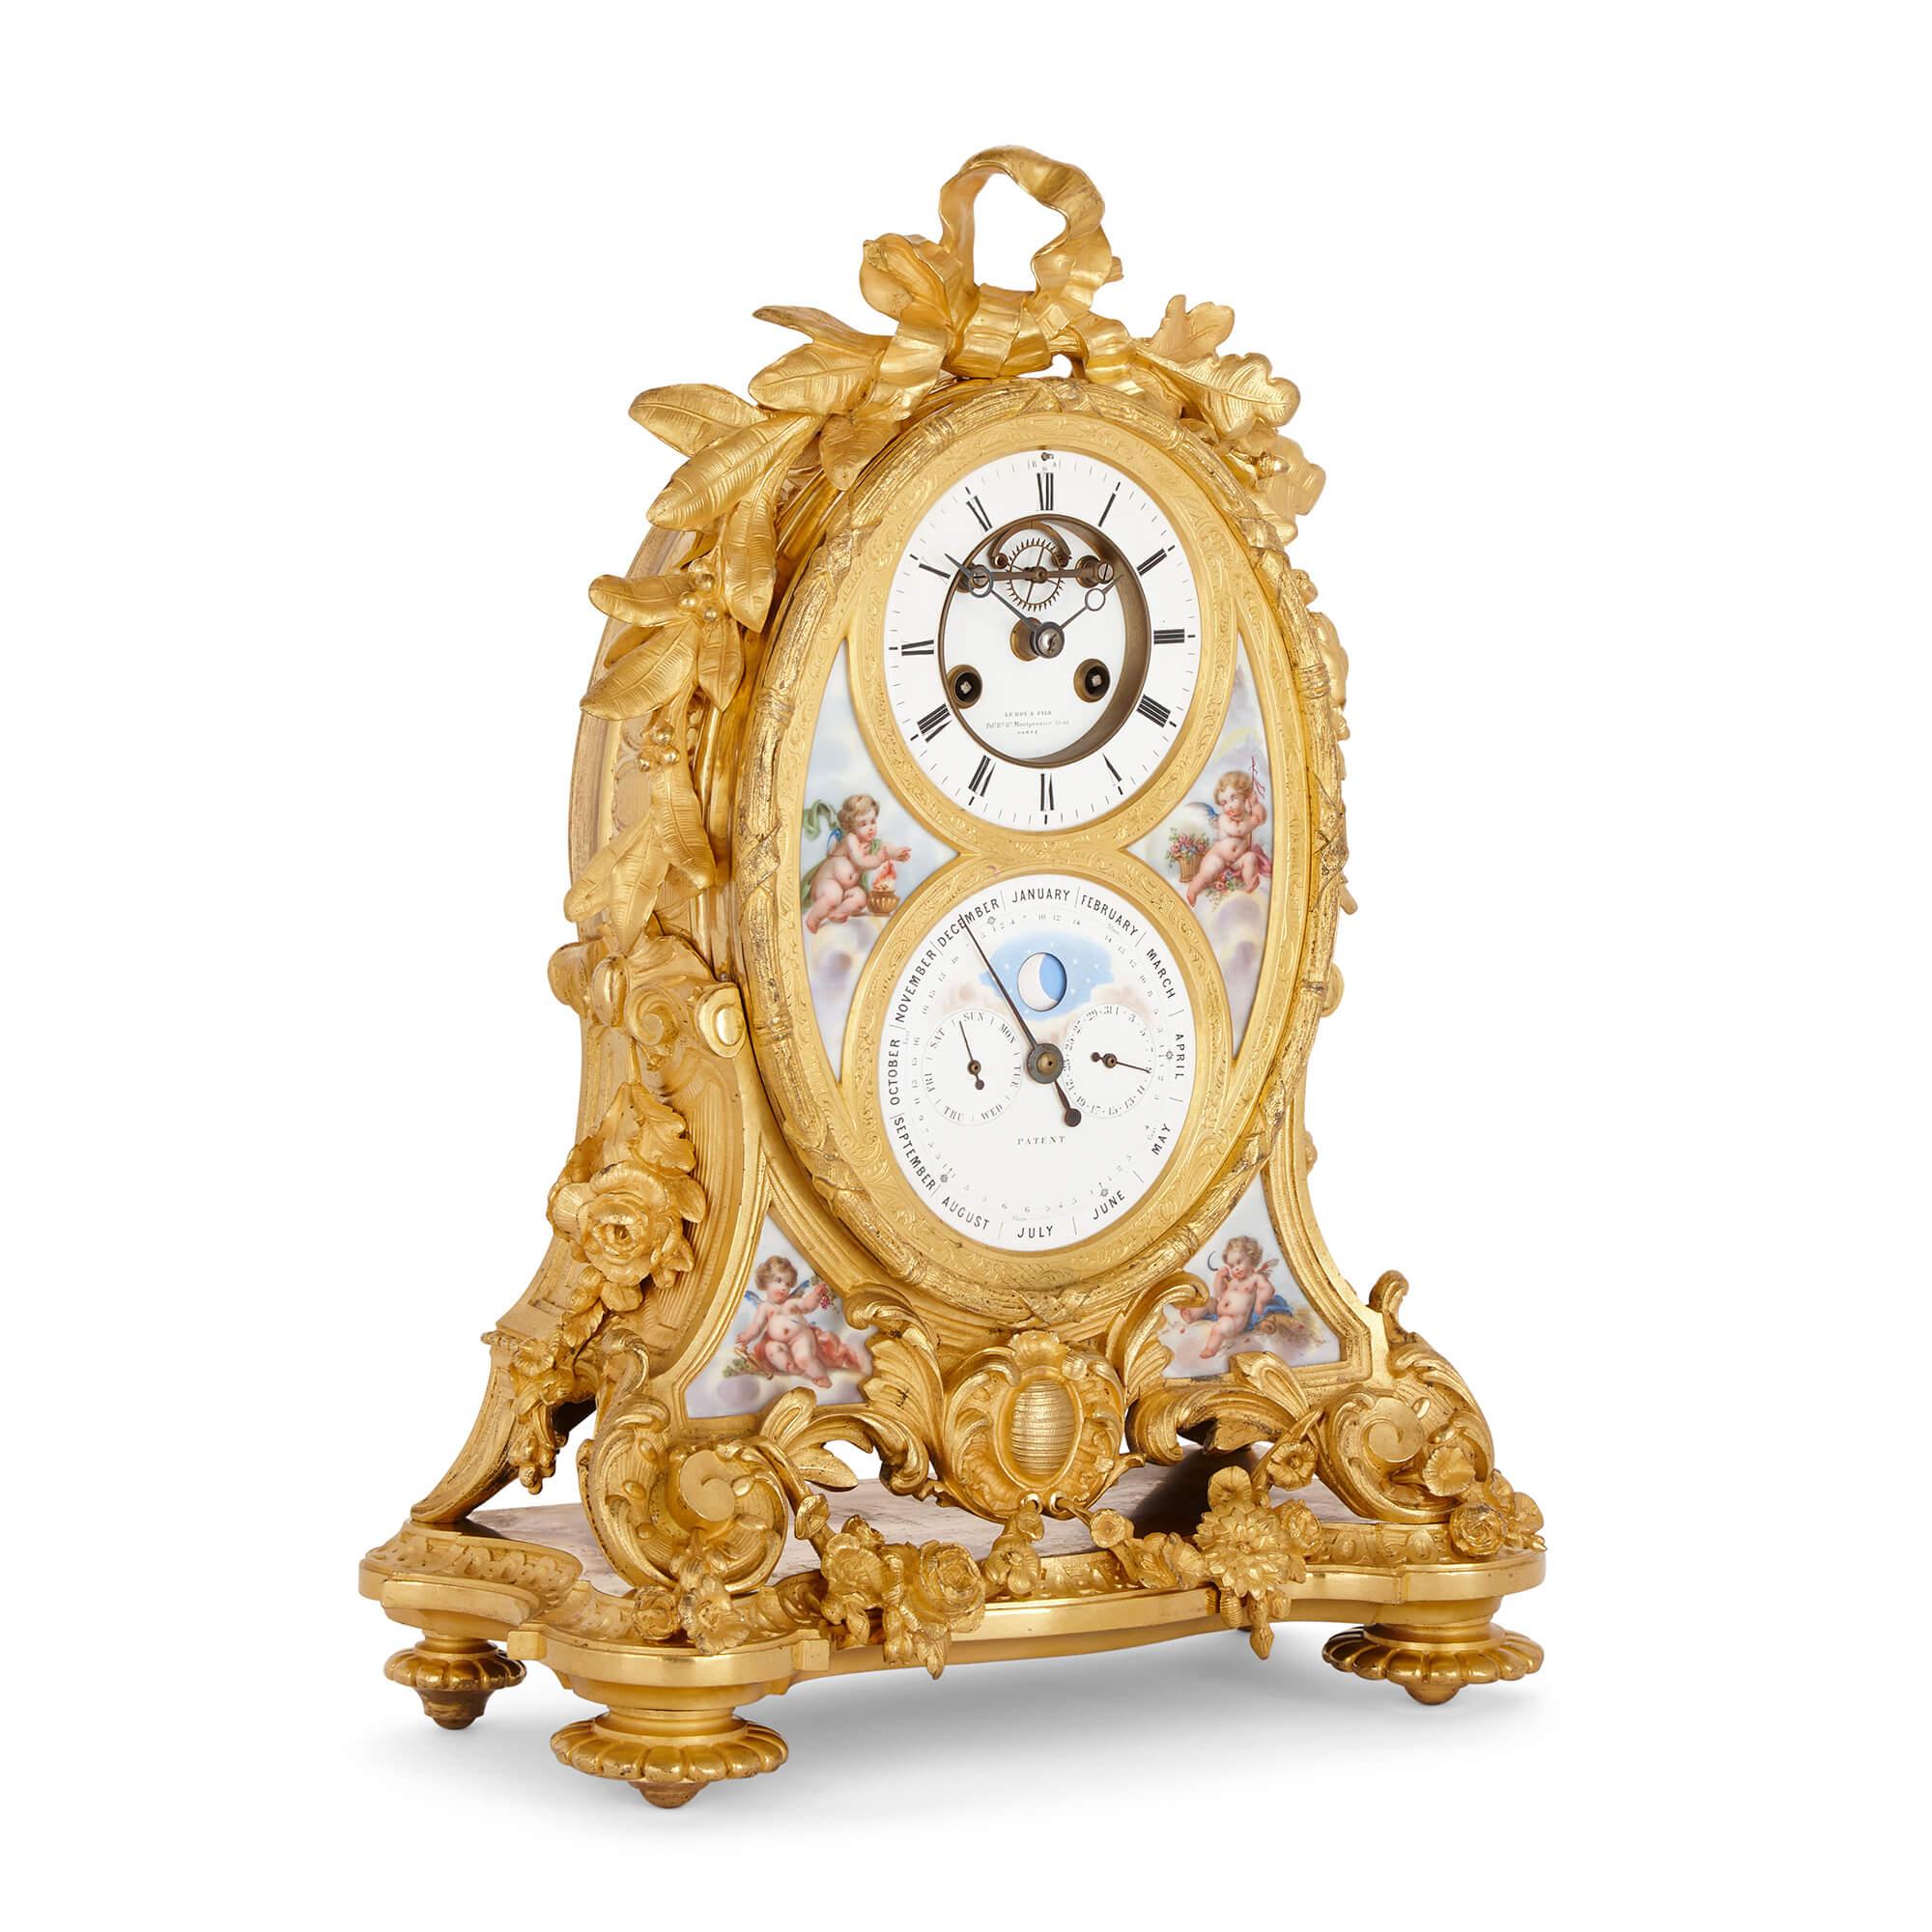 Very fine ormolu and Sèvres-style porcelain calendar mantel clock
French, 19th Century
Measures: Height 43cm, width 31cm, depth 16cm

In a similar style to pieces by the famed and leading clockmaking firm of the late nineteenth century, Charles